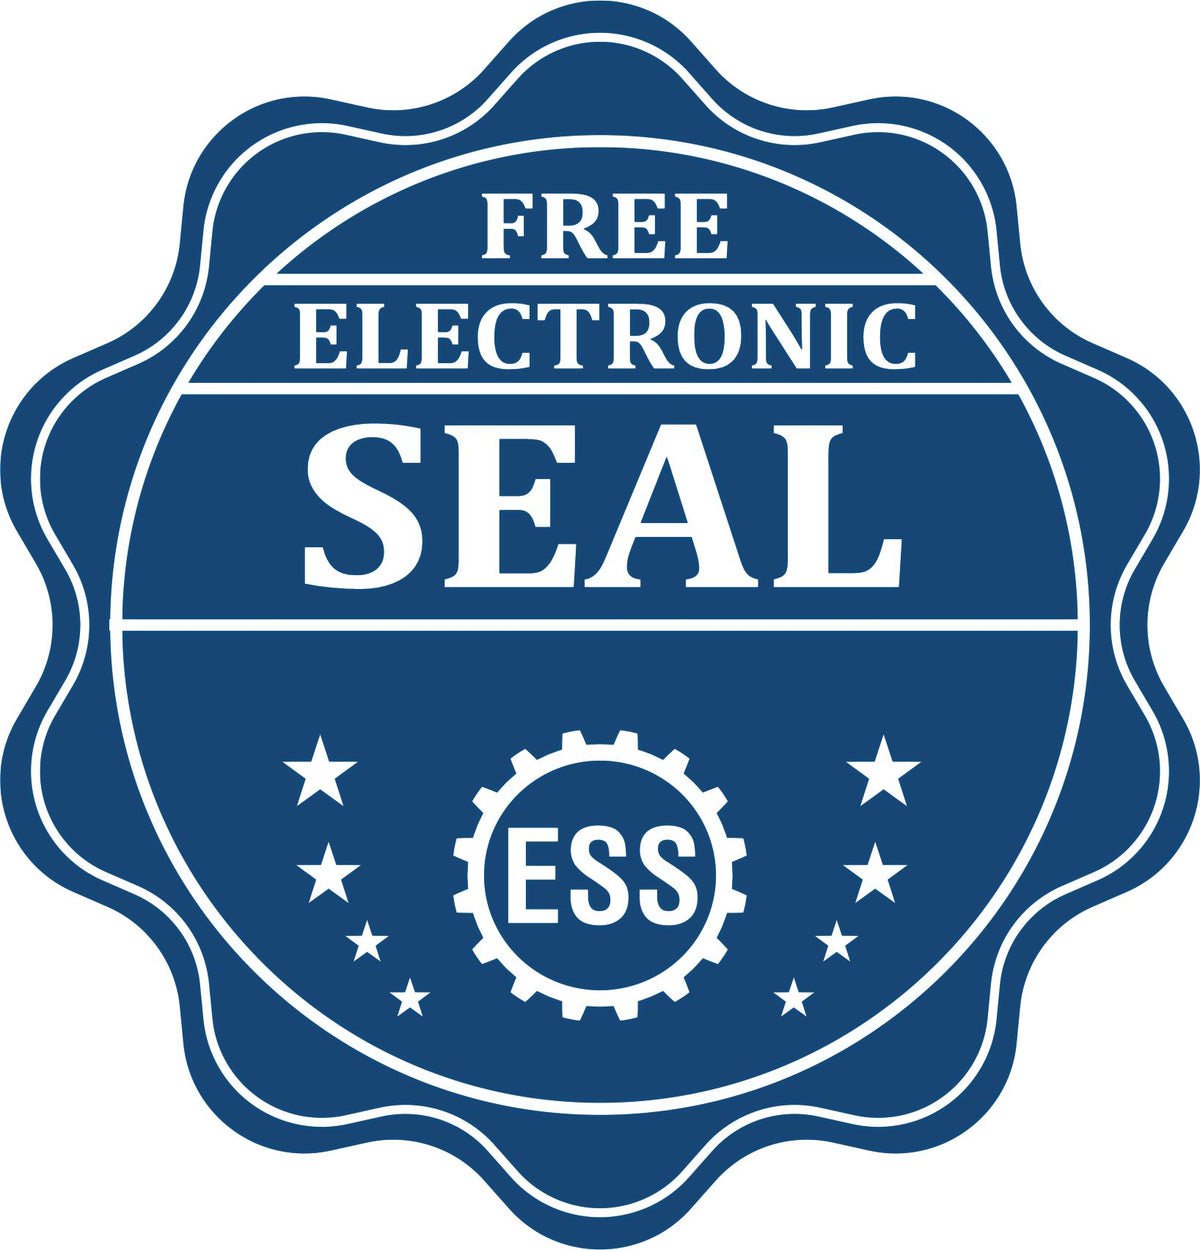 A badge showing a free electronic seal for the State of North Dakota Extended Long Reach Engineer Seal with stars and the ESS gear on the emblem.